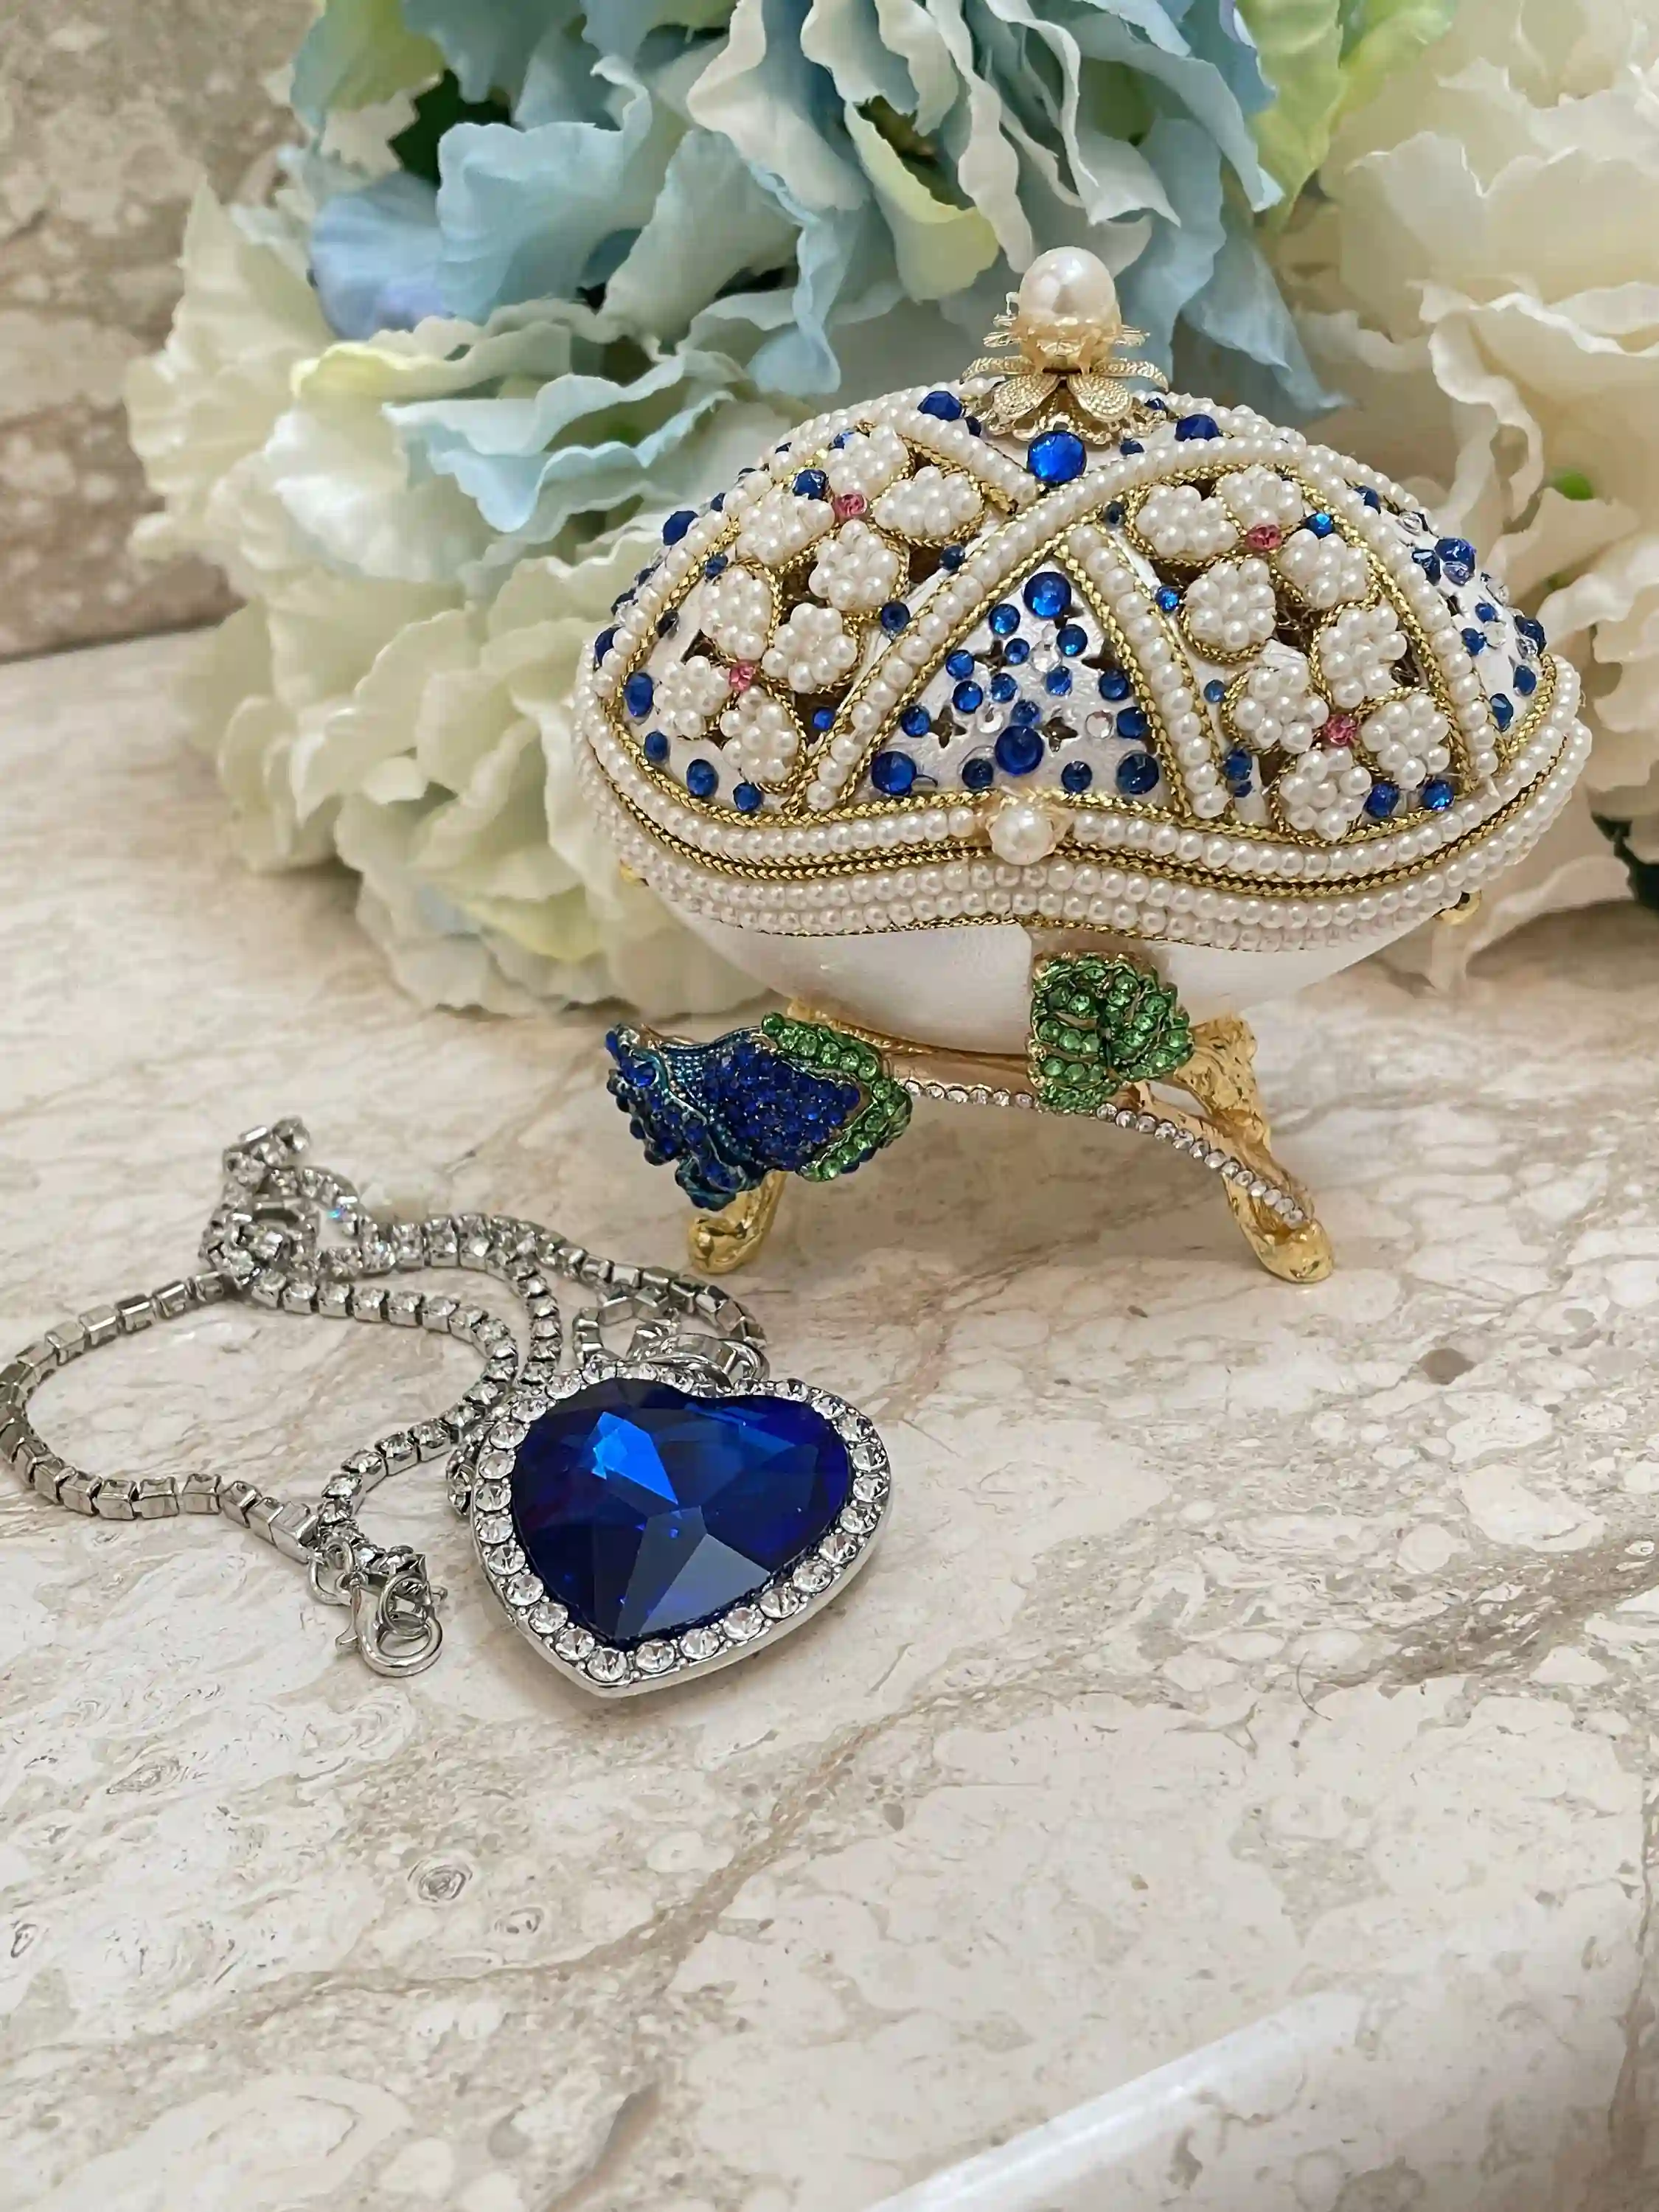 One Only Blue Rose Faberge Egg style Jewelry Box SET HANDCARVED Natural Egg Austrian Crystal Sapphire Faberge Egg MUSIC Box Handmade 1990 